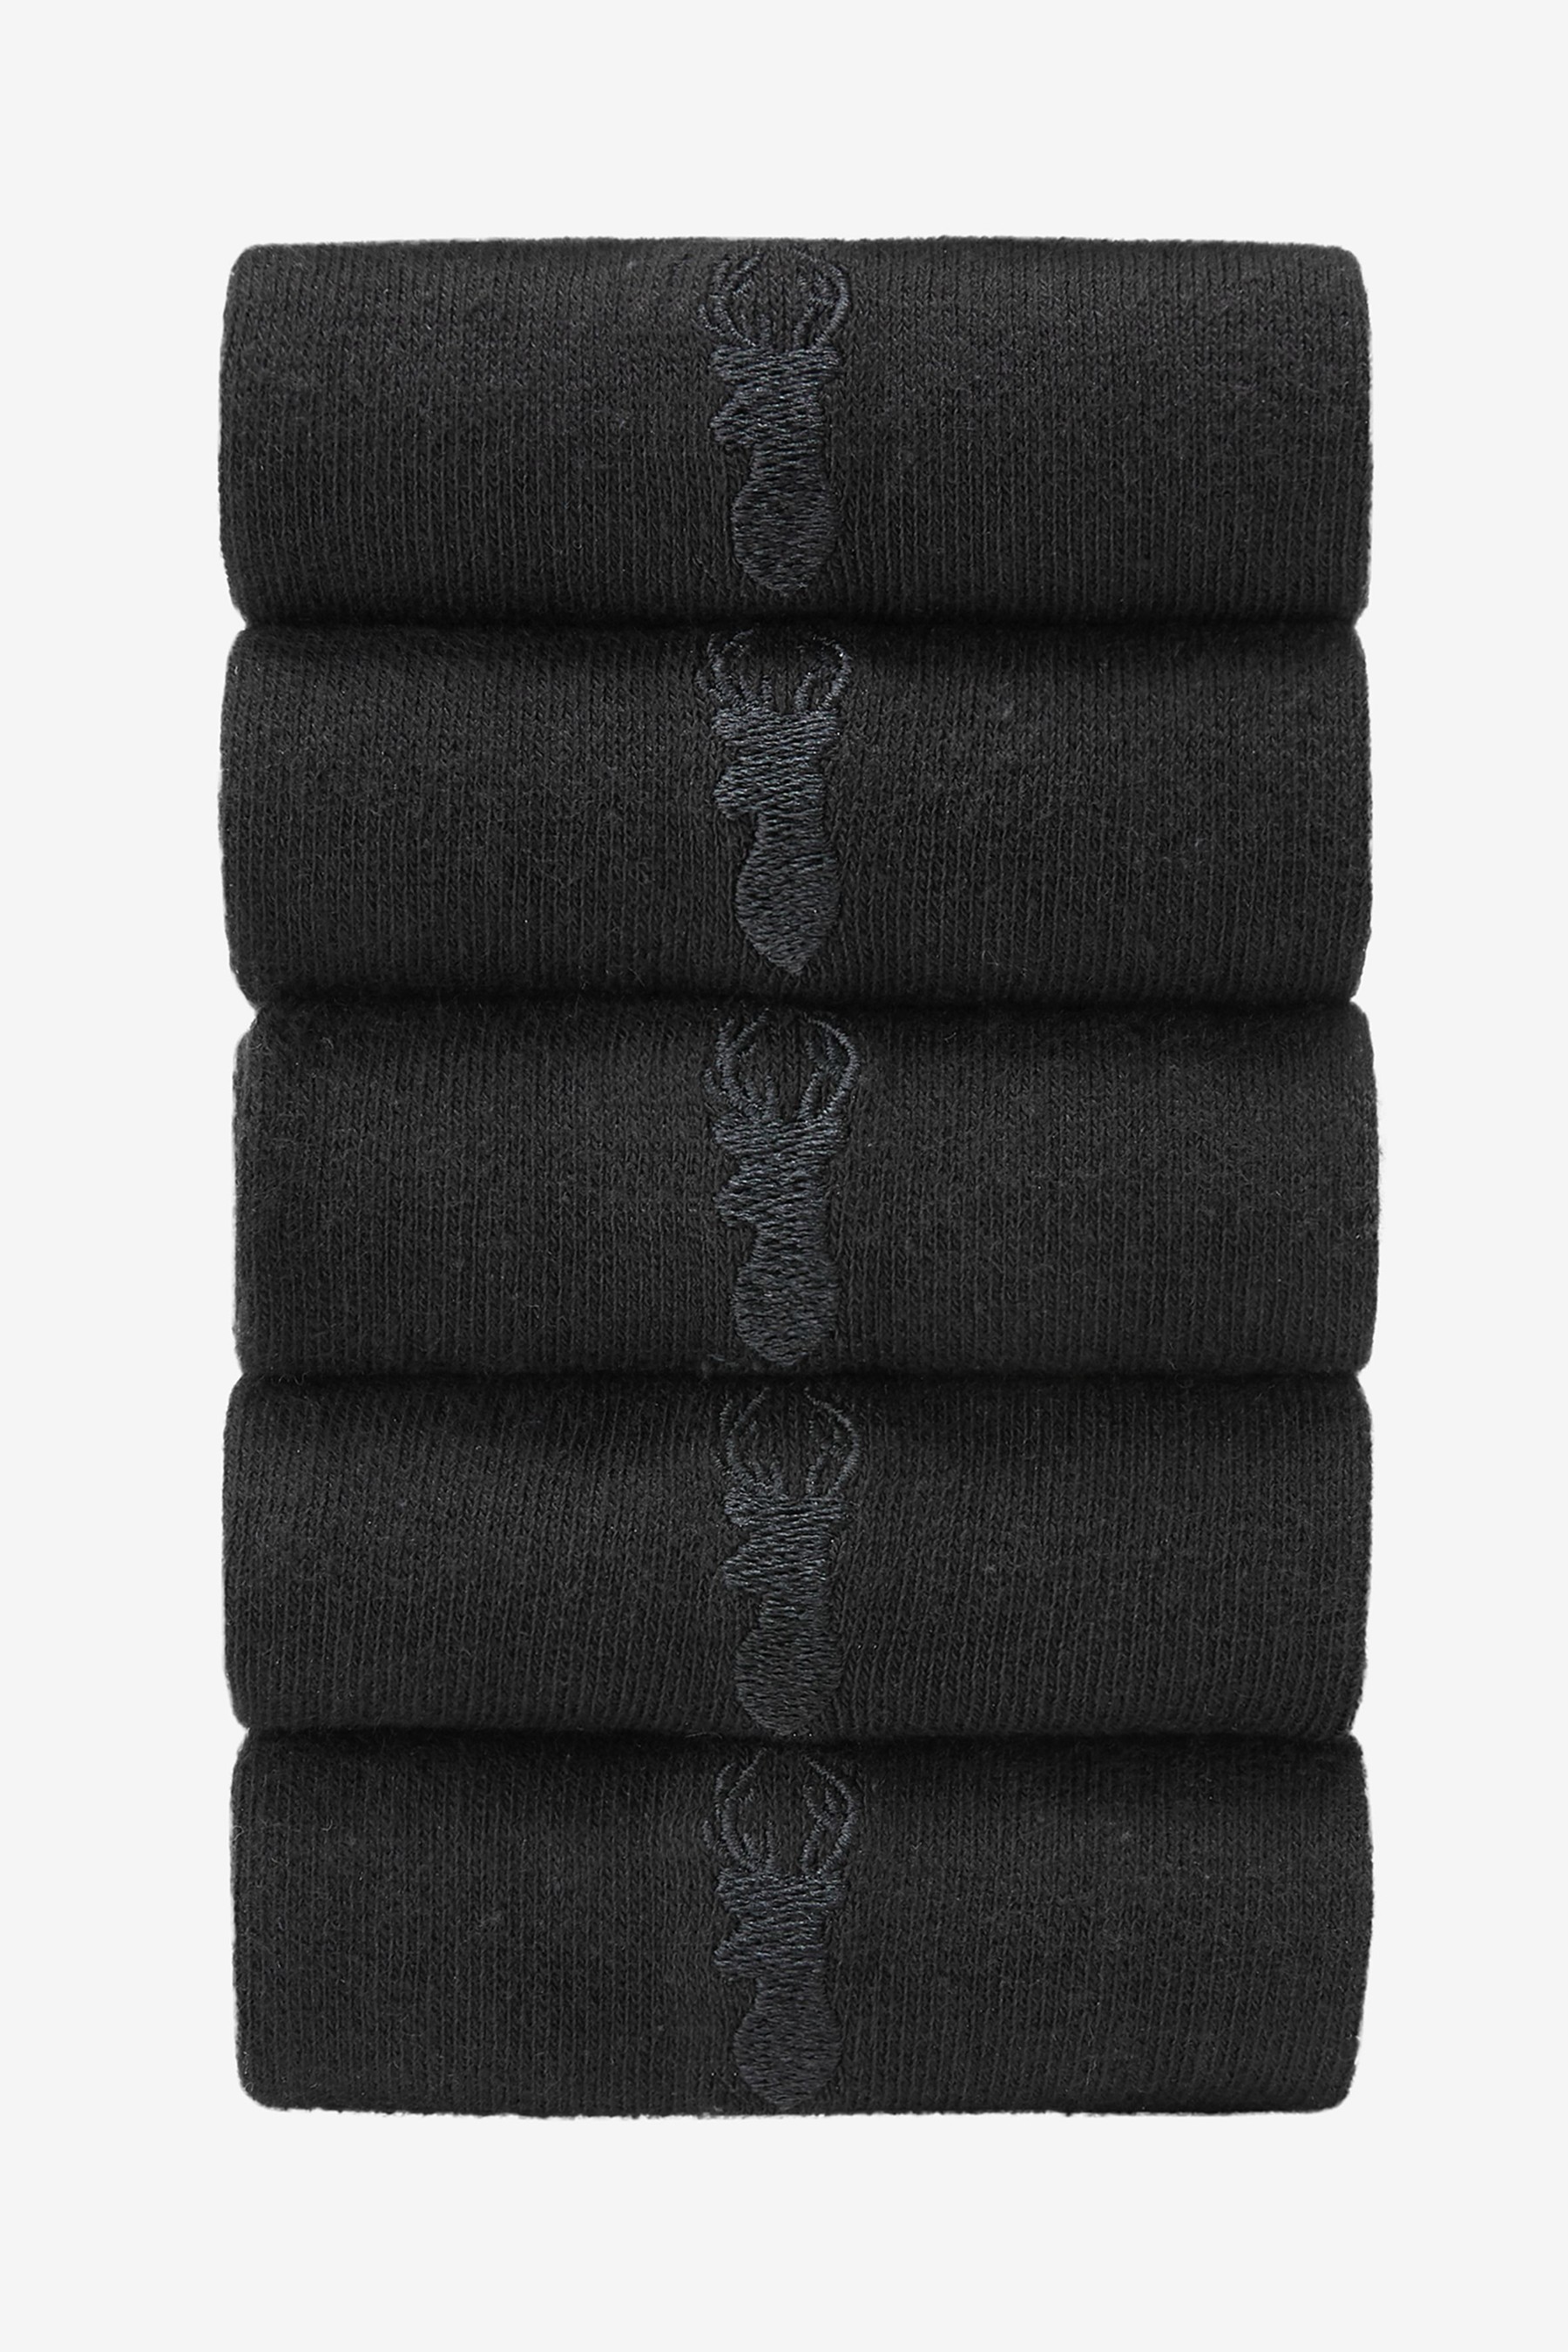 Embroidered Stag Socks 5 Pack